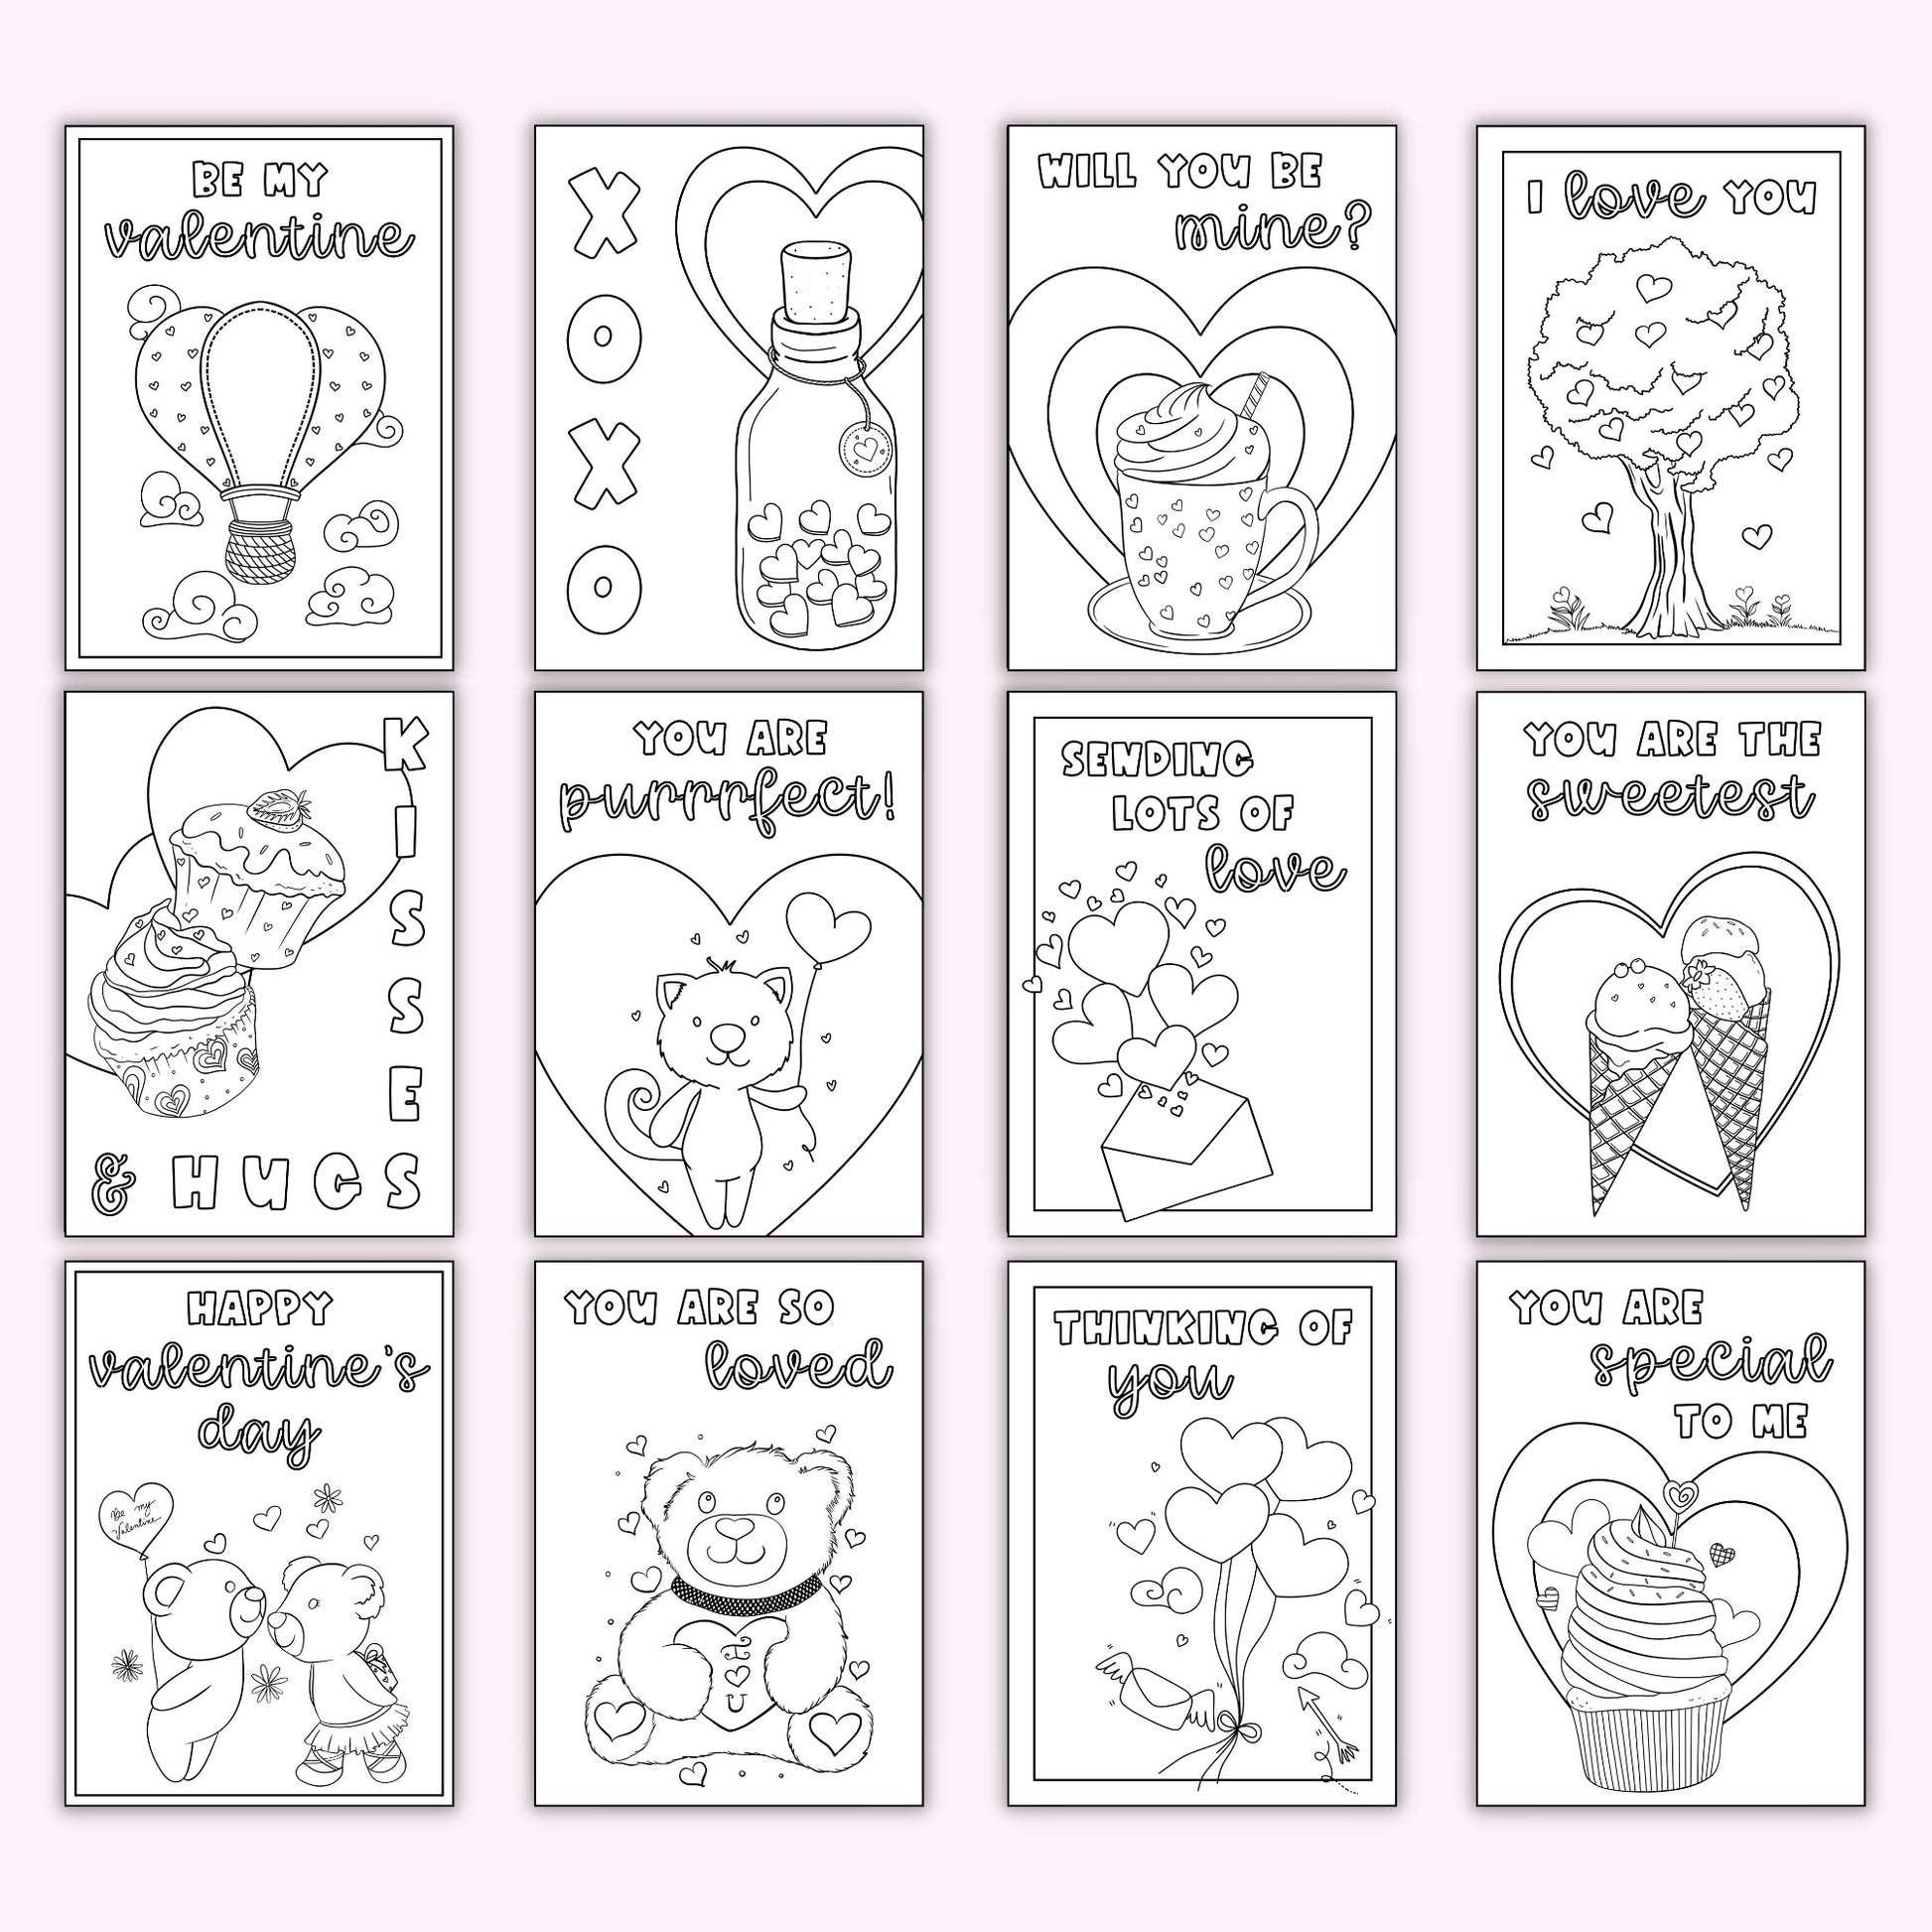 Valentines day colouring cards set of â printables by the craft